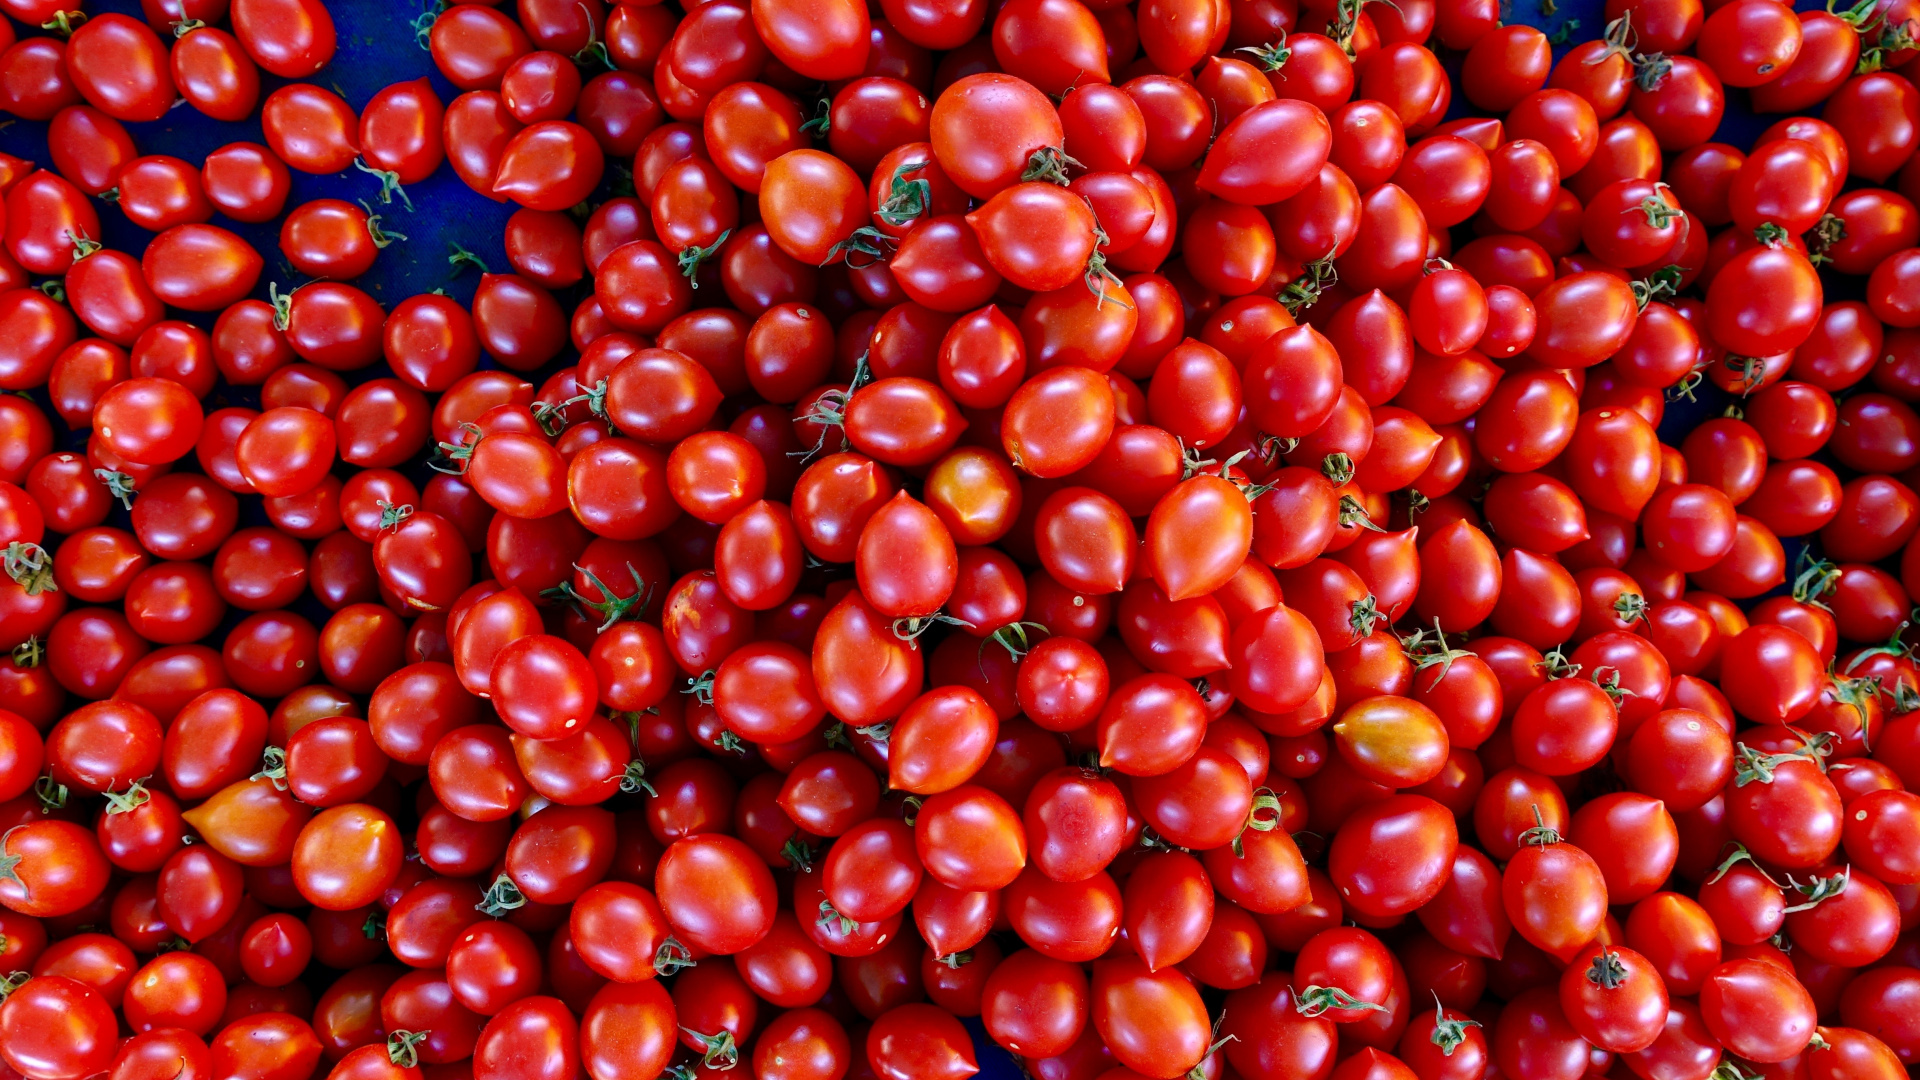 Red Round Fruits on Blue Plastic Container. Wallpaper in 1920x1080 Resolution